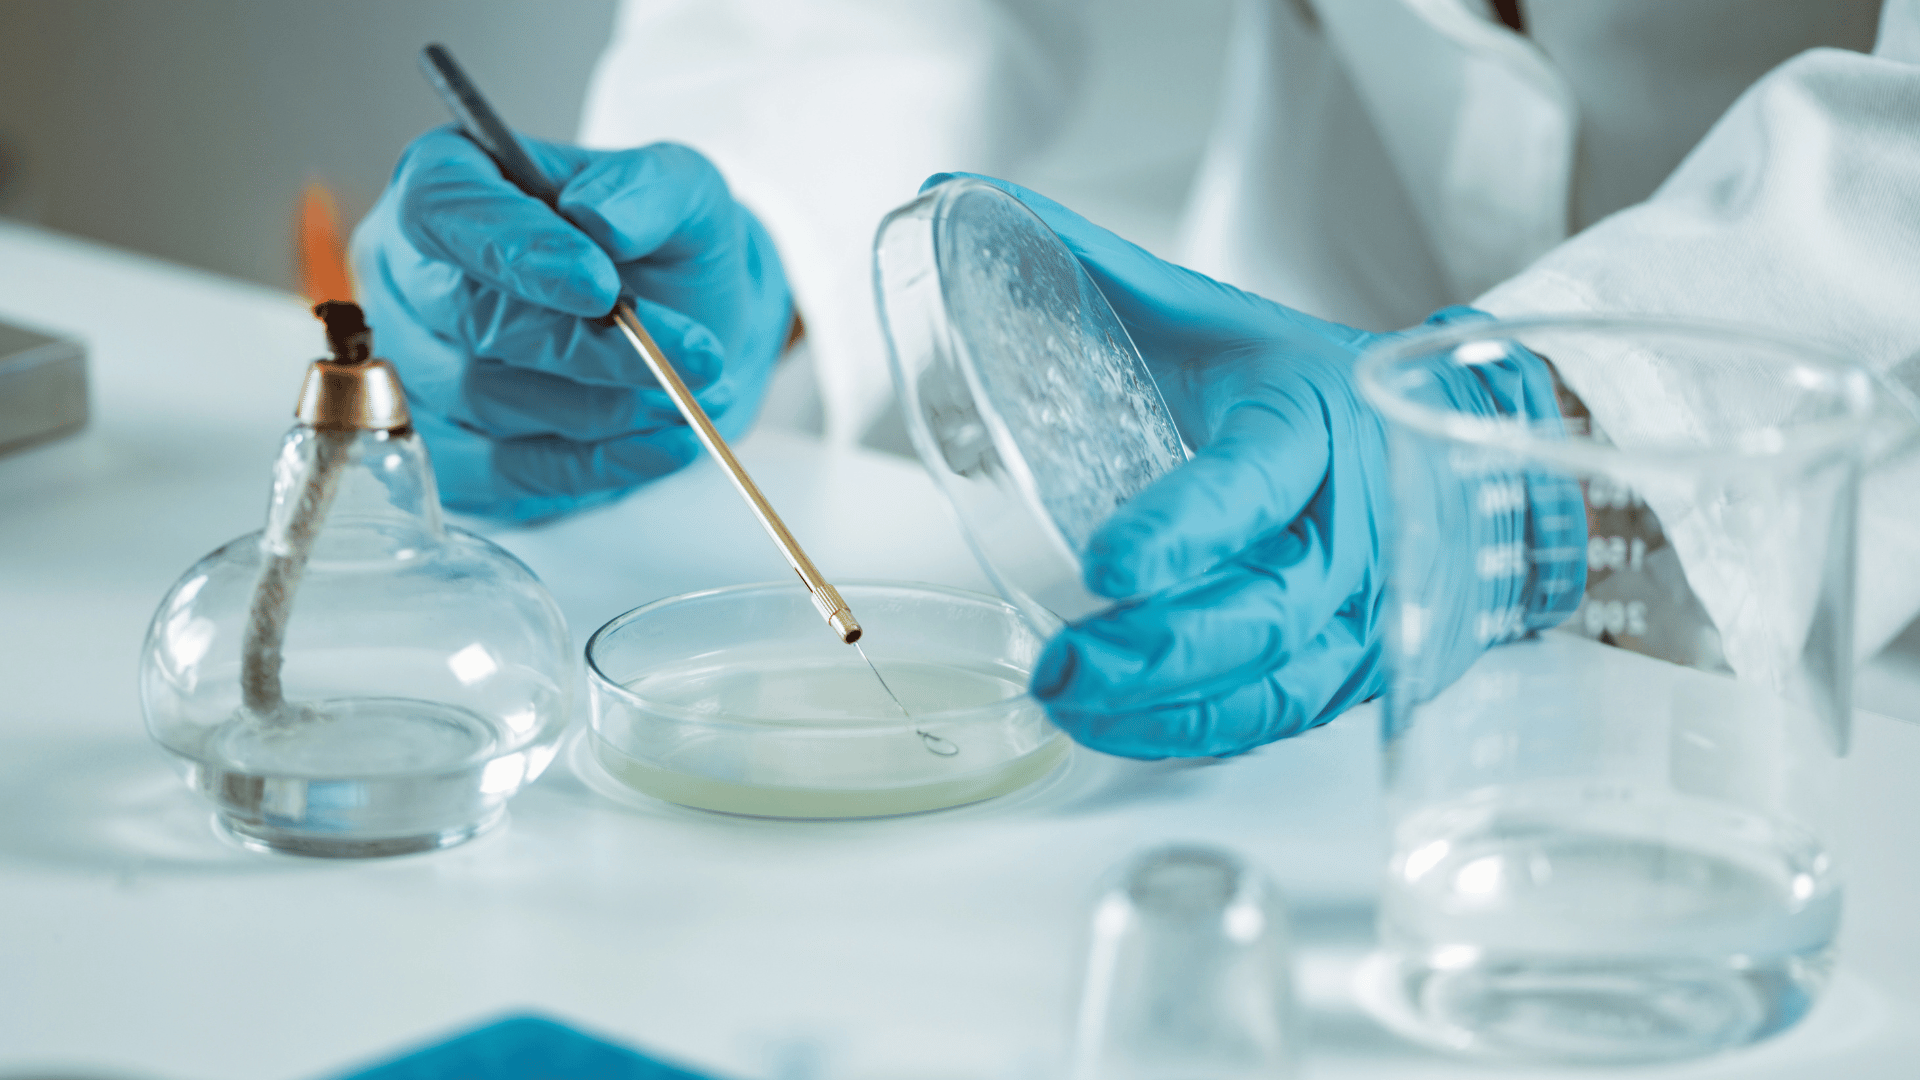 Rdx Bioscience Inc. And Its CEO Will Pay $13.25 Million To Resolve a False Claims Act Case